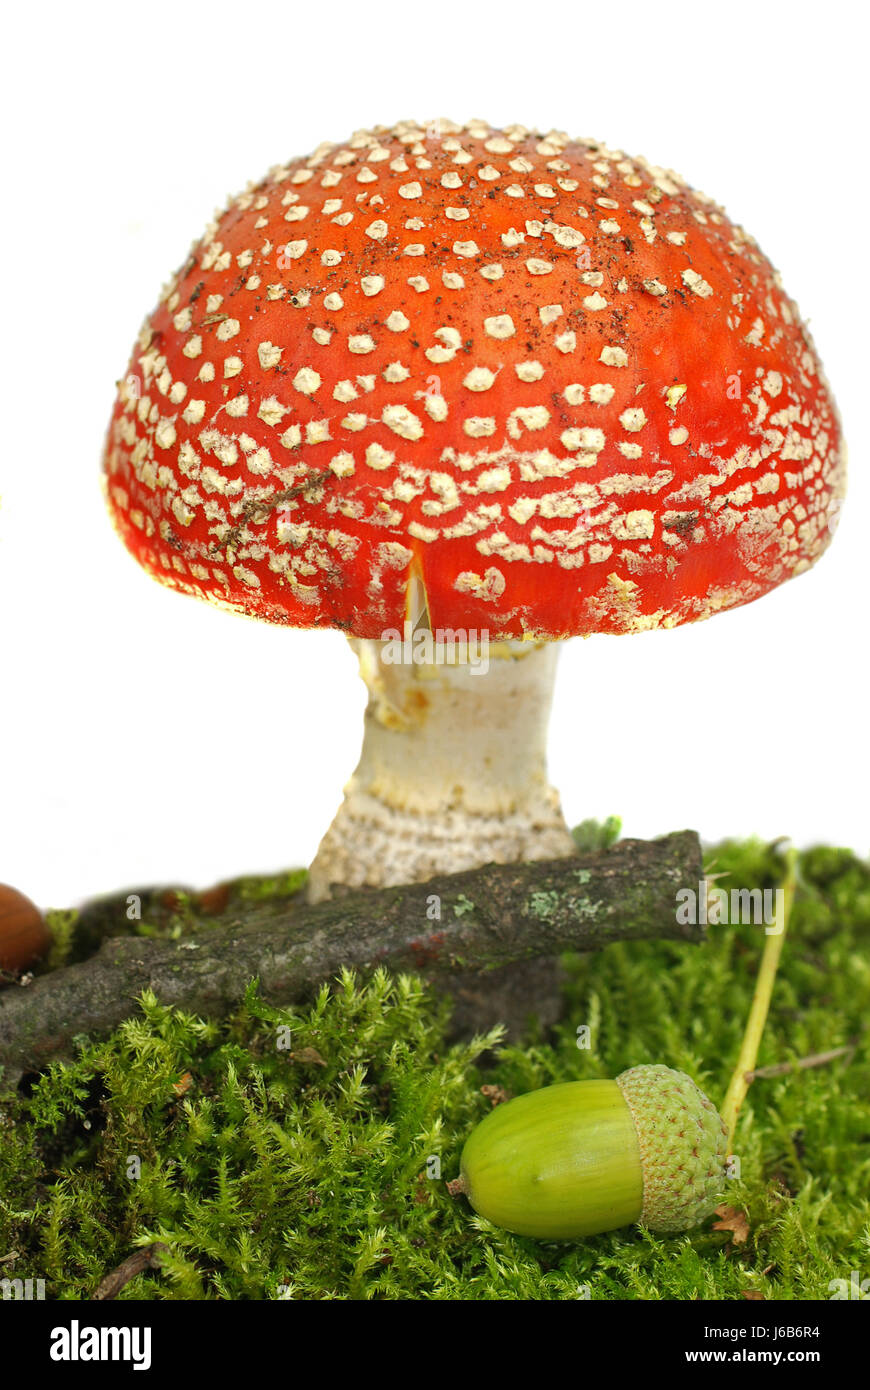 dots moss fly agaric mushrooms mushroom fungus toadstool red toxic poisonous Stock Photo